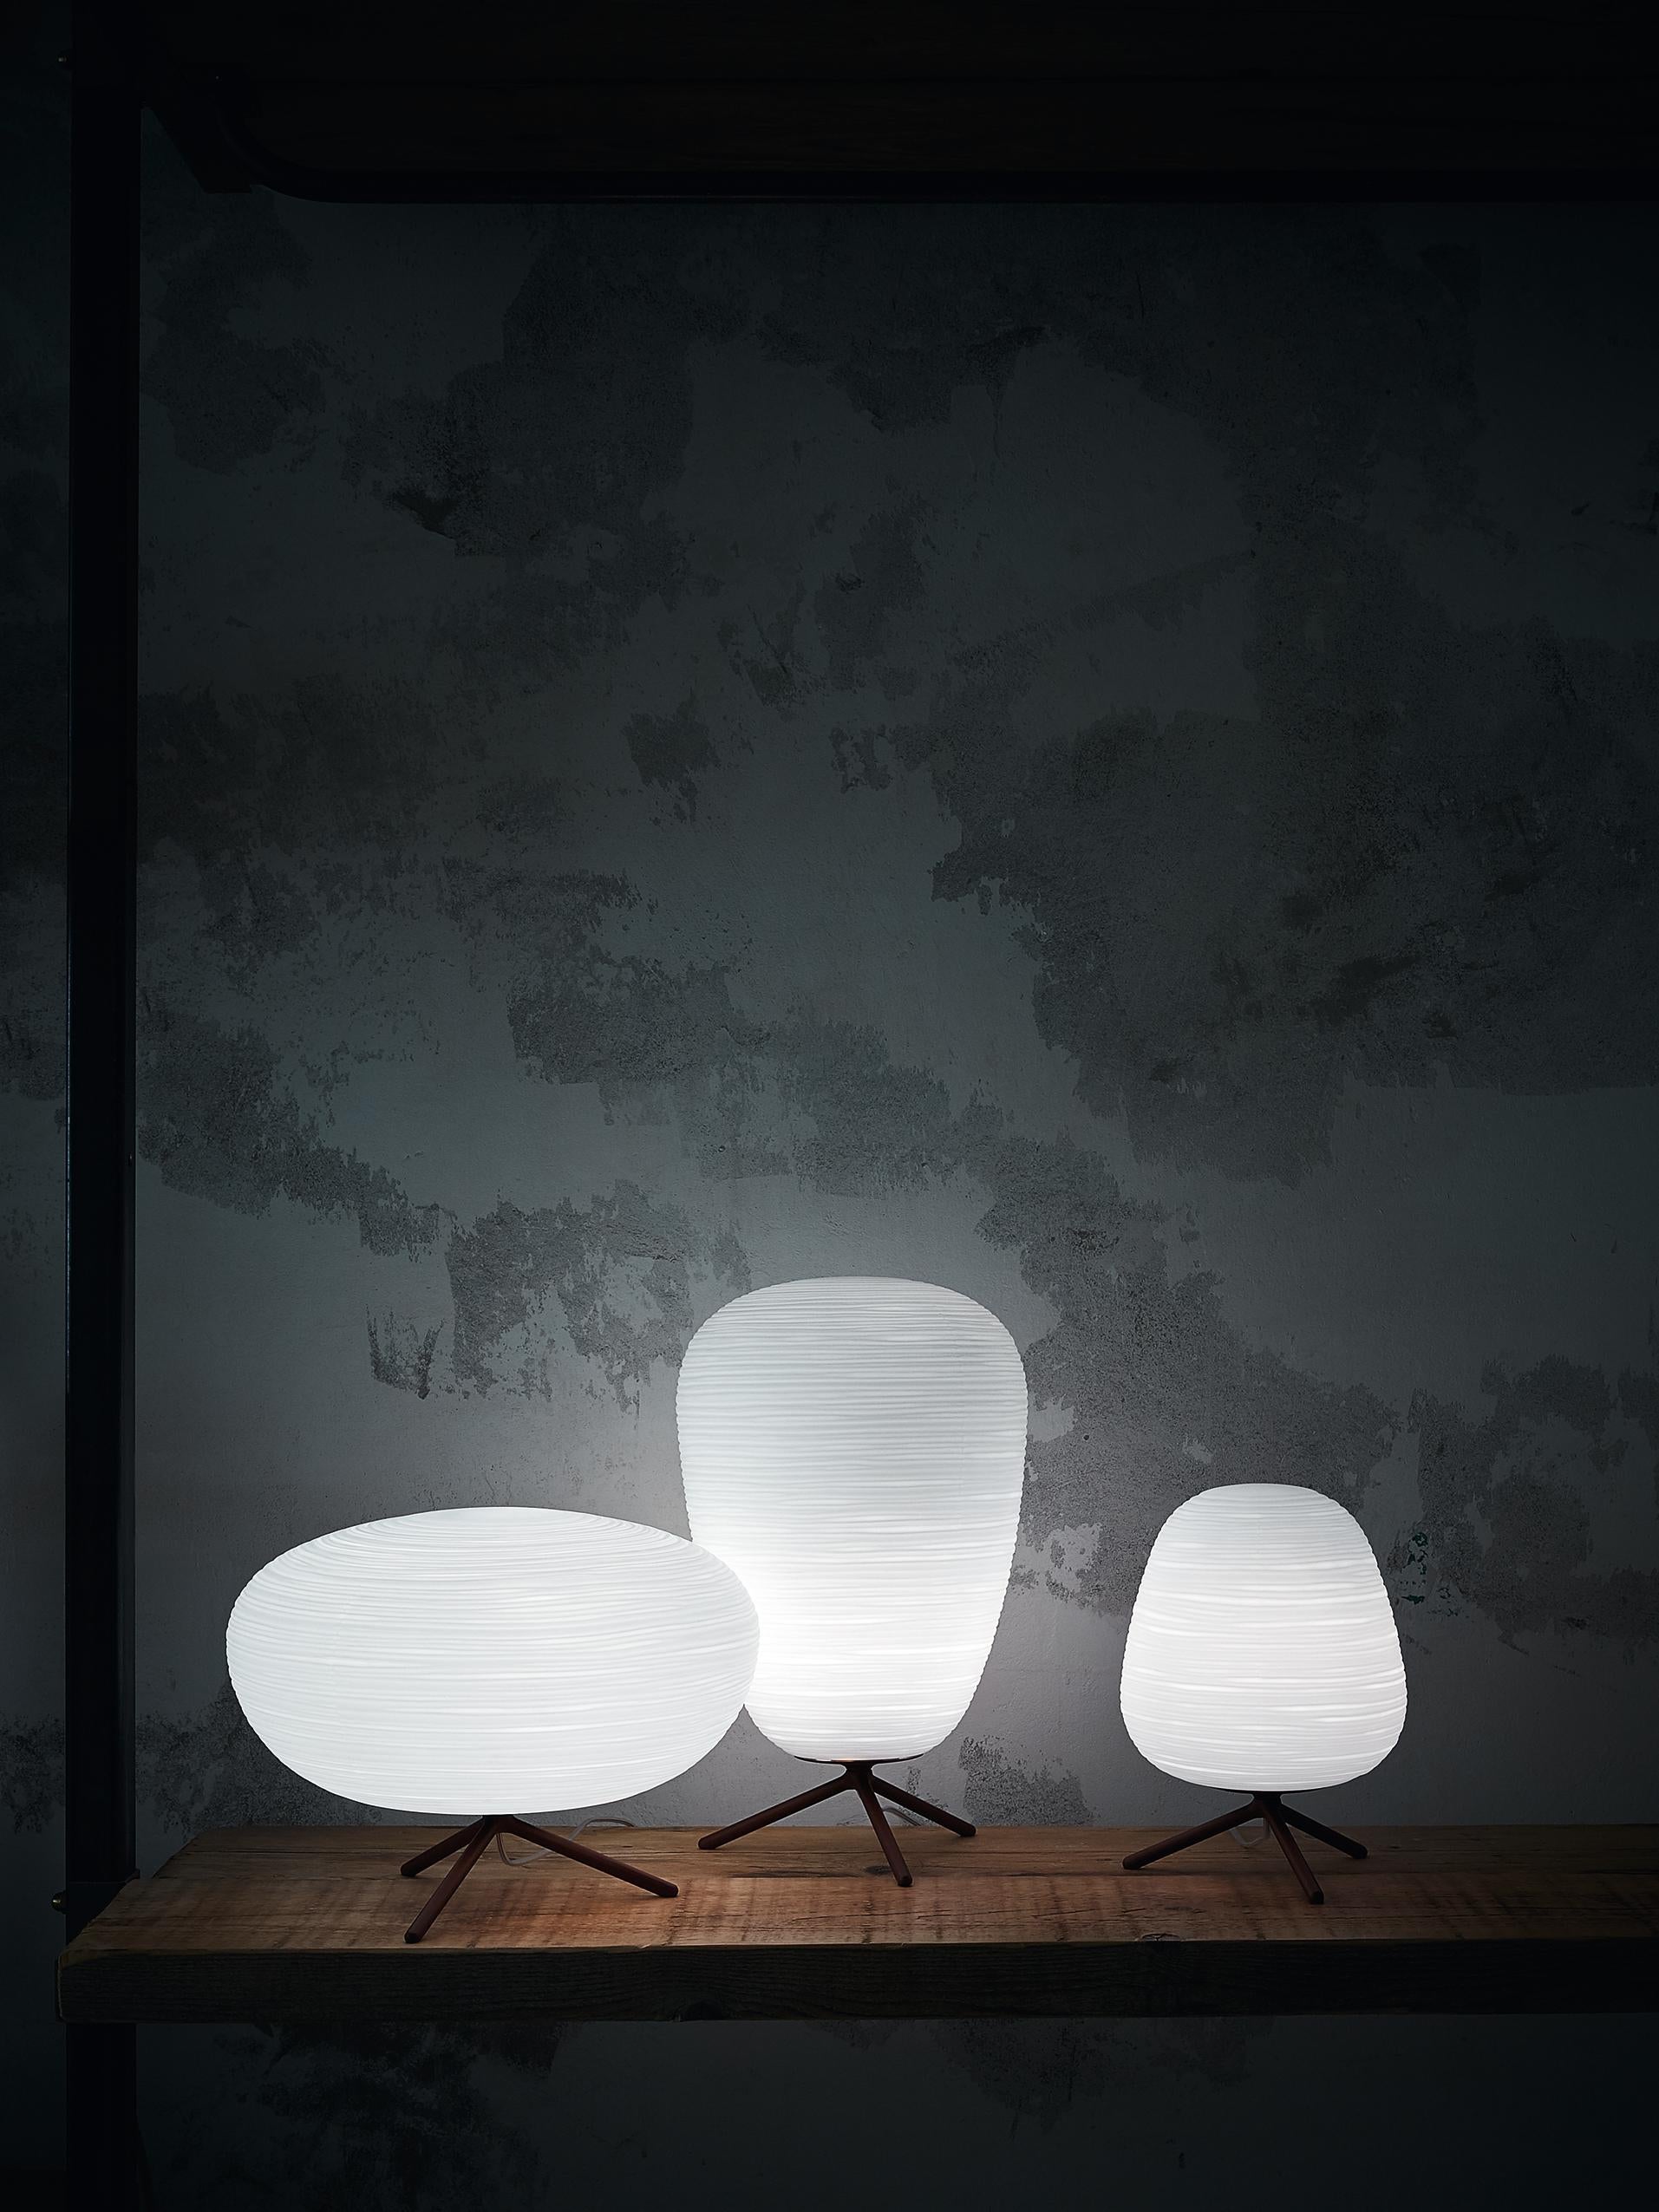 Foscarini Rituals 2 Table Lamp White by Ludovica & Roberto Palomba In New Condition For Sale In Brooklyn, NY